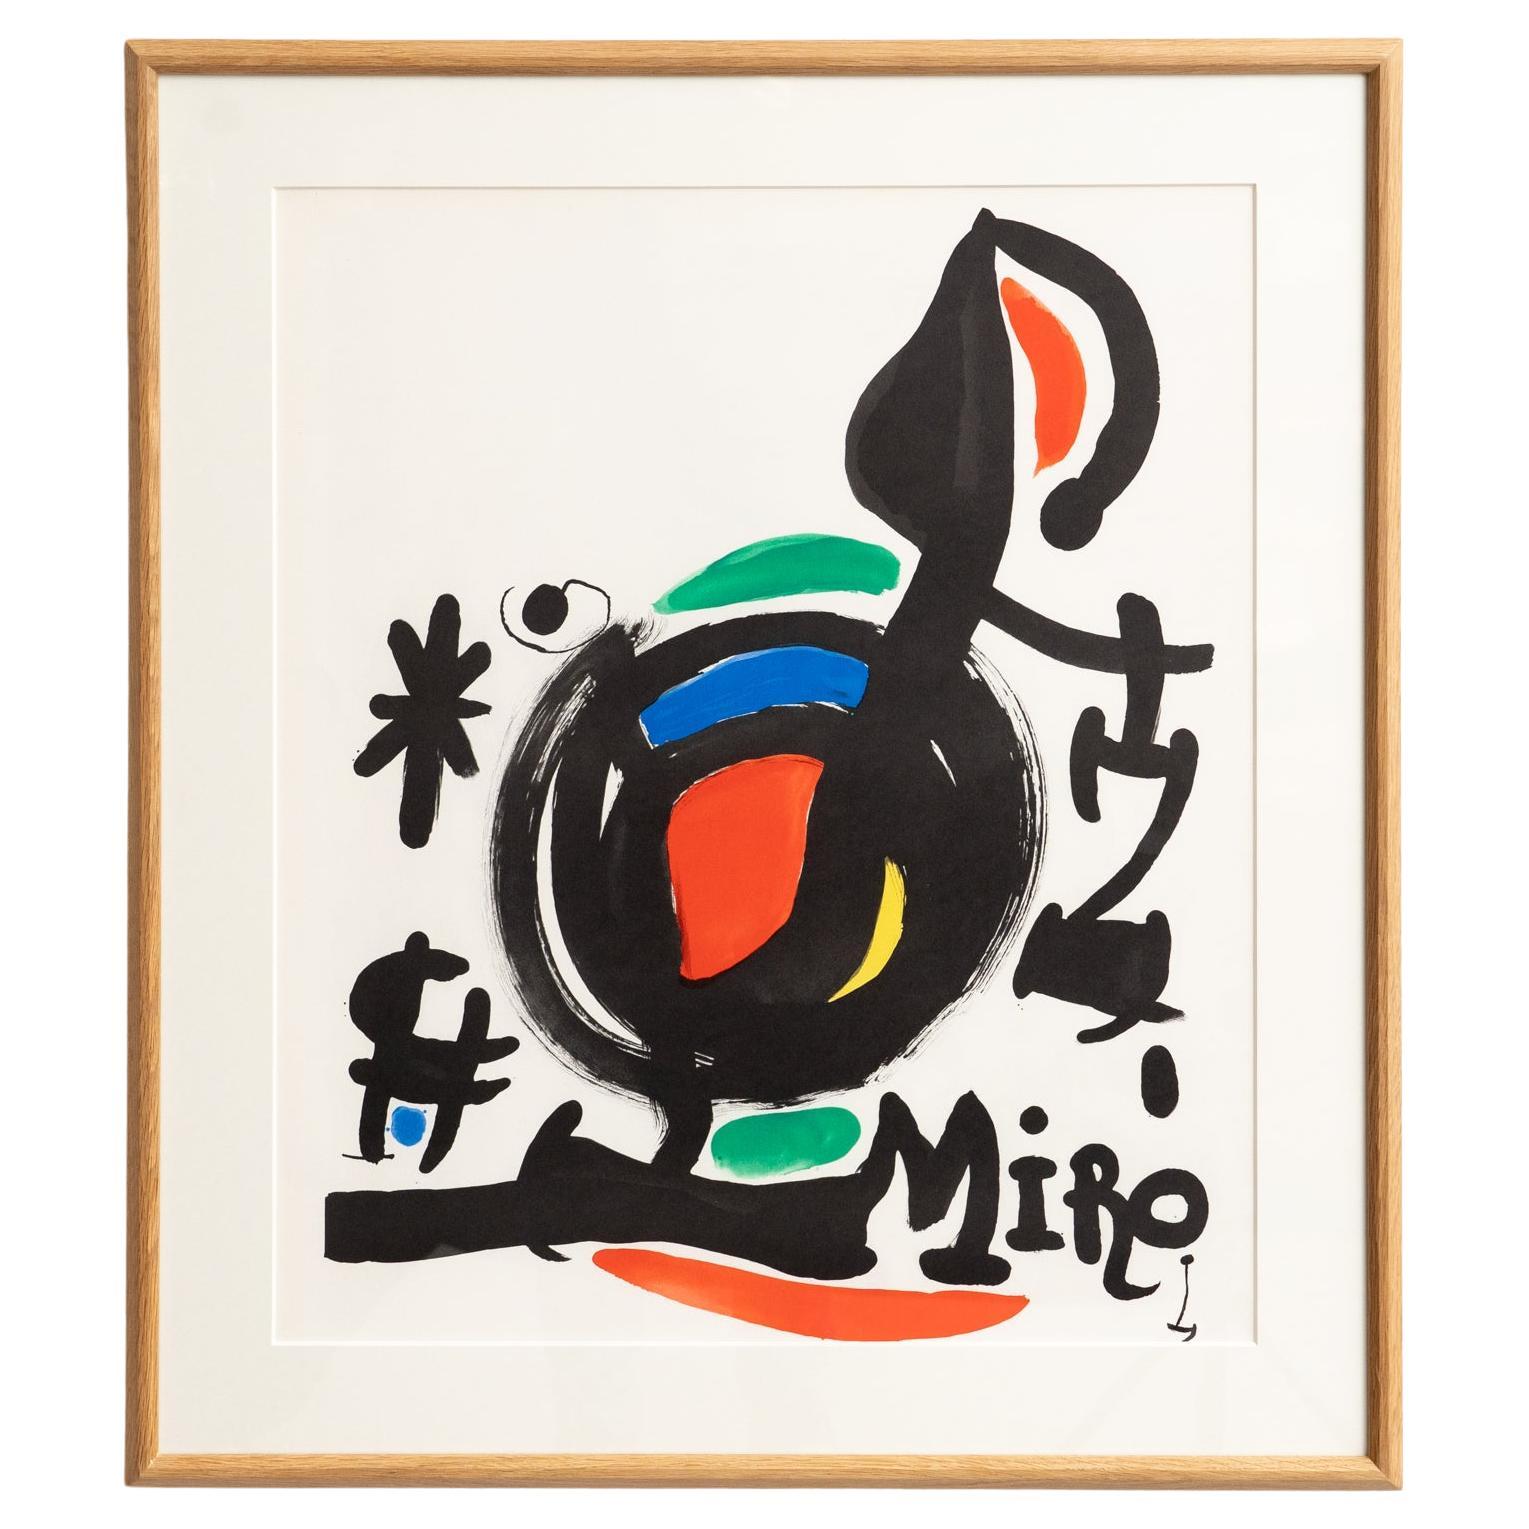  High Quality Fine Art Color Framed Lithography by Joan Miró, circa 1960. For Sale